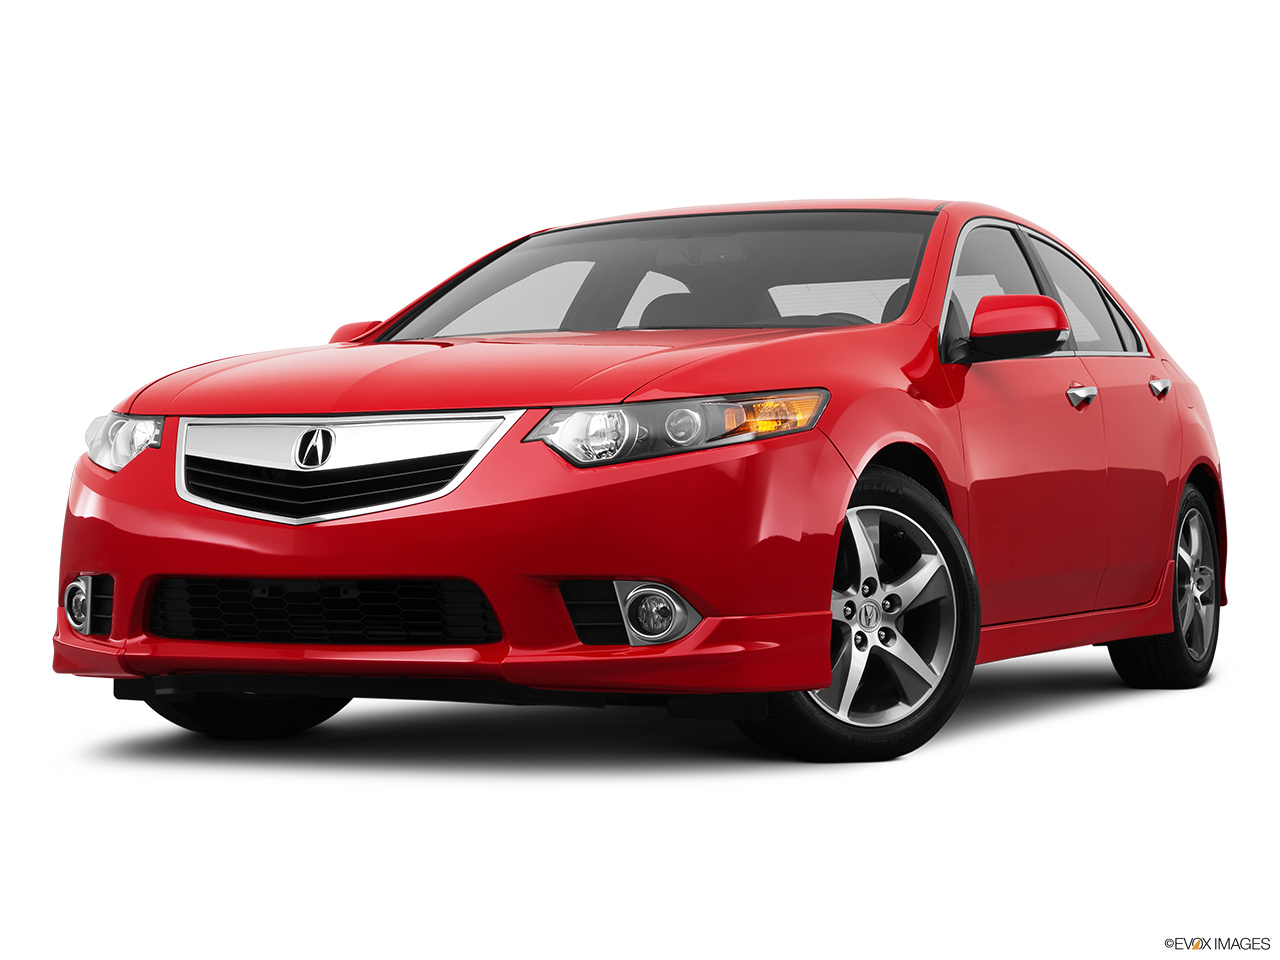 2012 Acura TSX Special Edition 6-Speed Manual Front angle view, low wide perspective. 